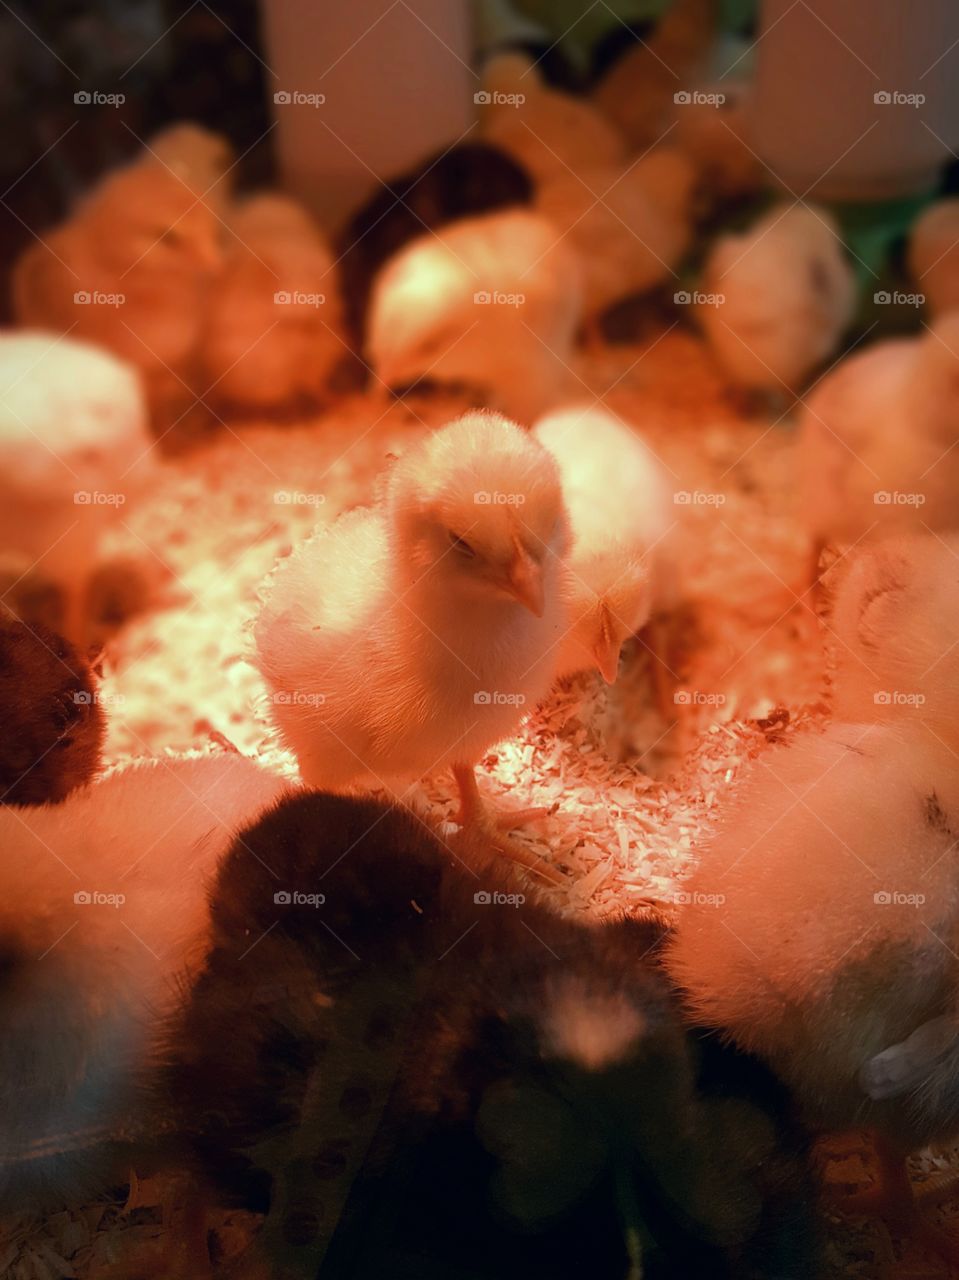 Baby chick in an incubator